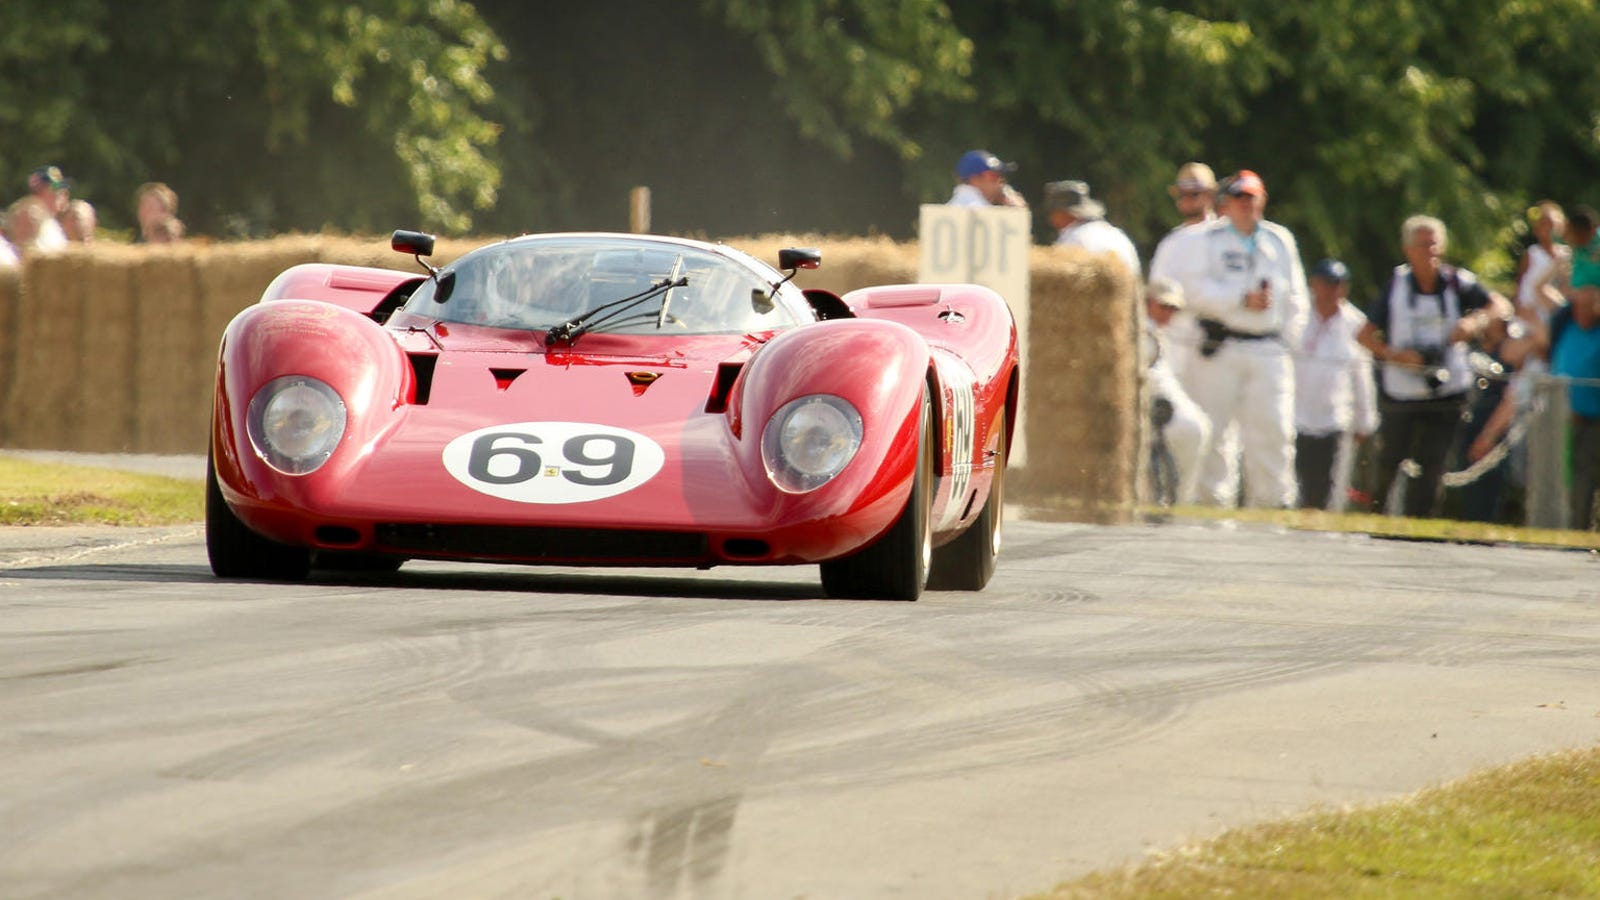 This 1969 Ferrari 312 P Berlinetta Has The Looks The V12 And The Driver